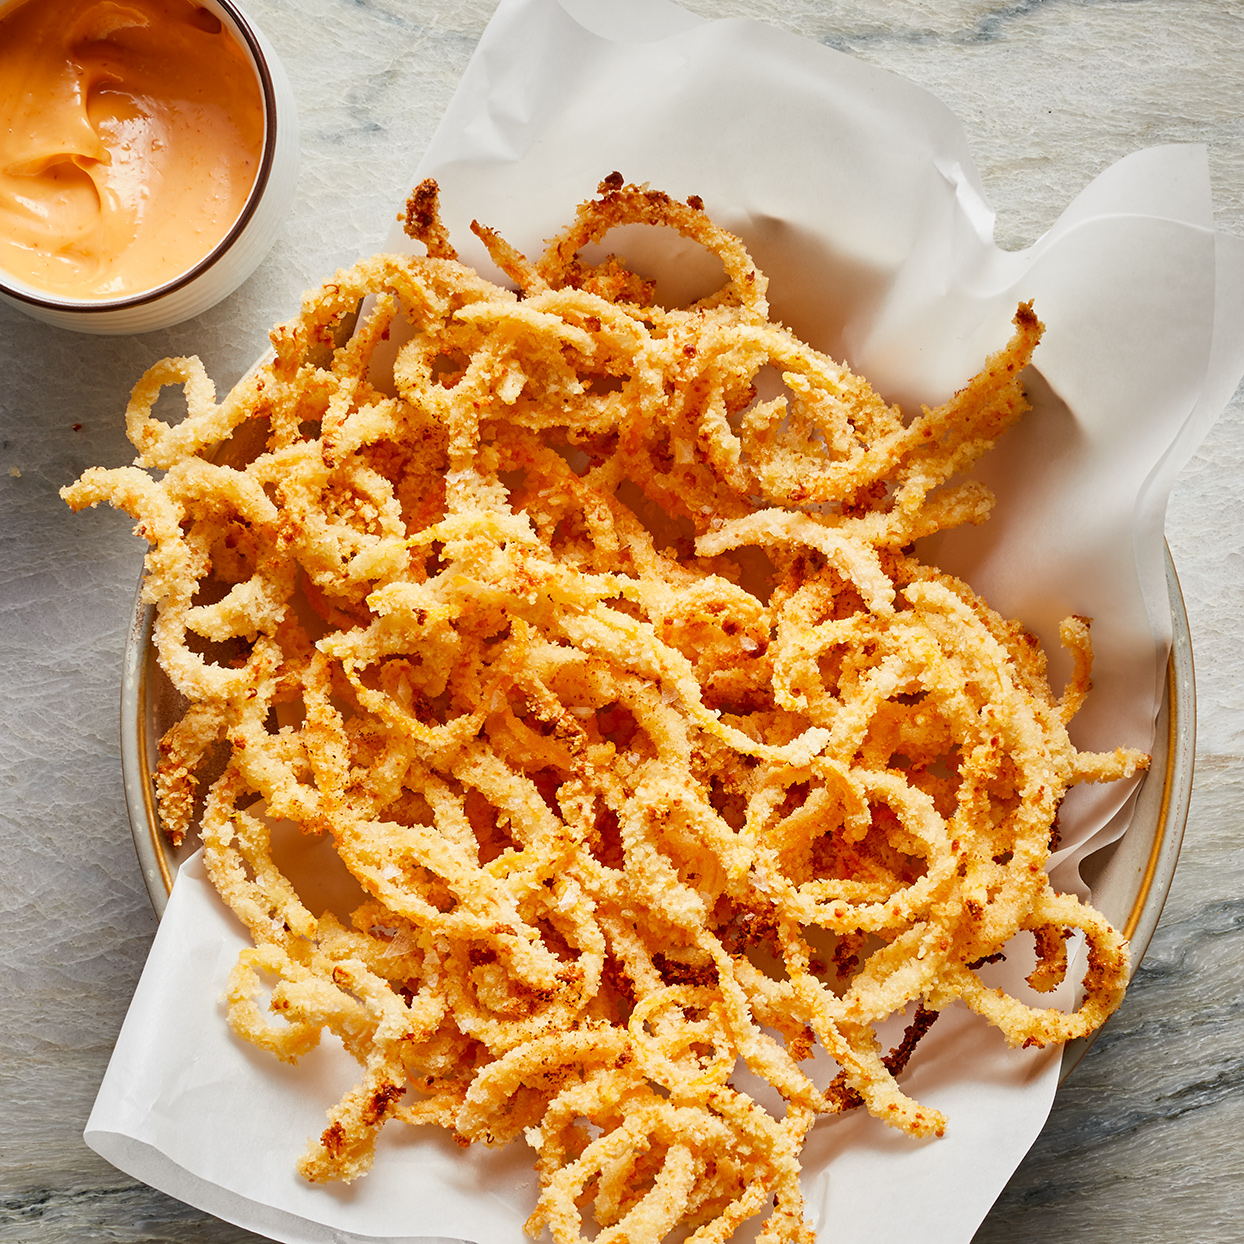 <p>Sweet spiralized butternut squash is encased in a salty, extra-crunchy exterior for a serving of slightly sweet curly fries. You can pair these baked butternut squash shoestring fries with any protein of your choice, but we're partial to grilled fish or chicken. Look for pre-spiralized squash in the refrigerated produce section.</p>
                          